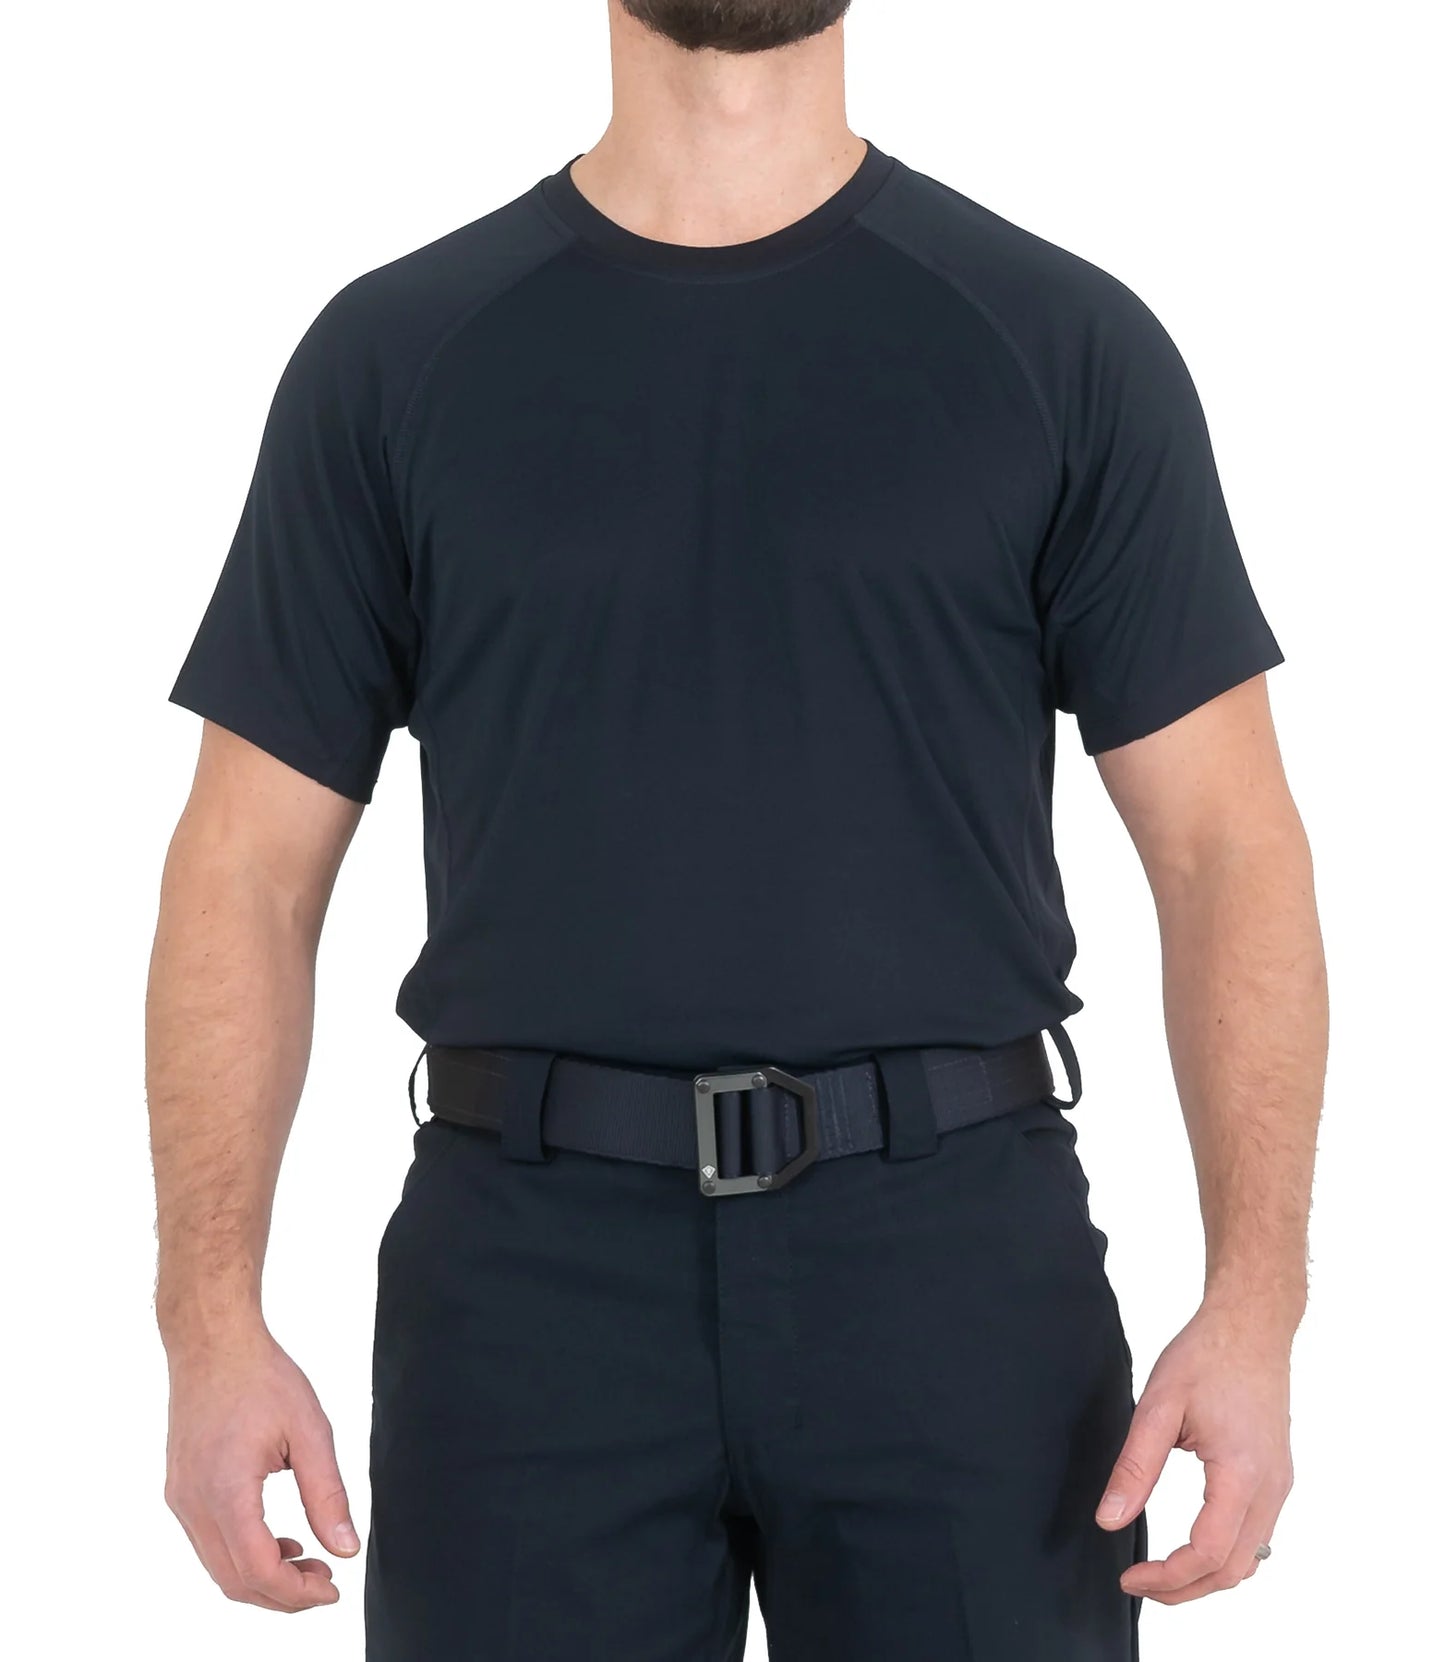 First Tactical Performance S/S T-shirt